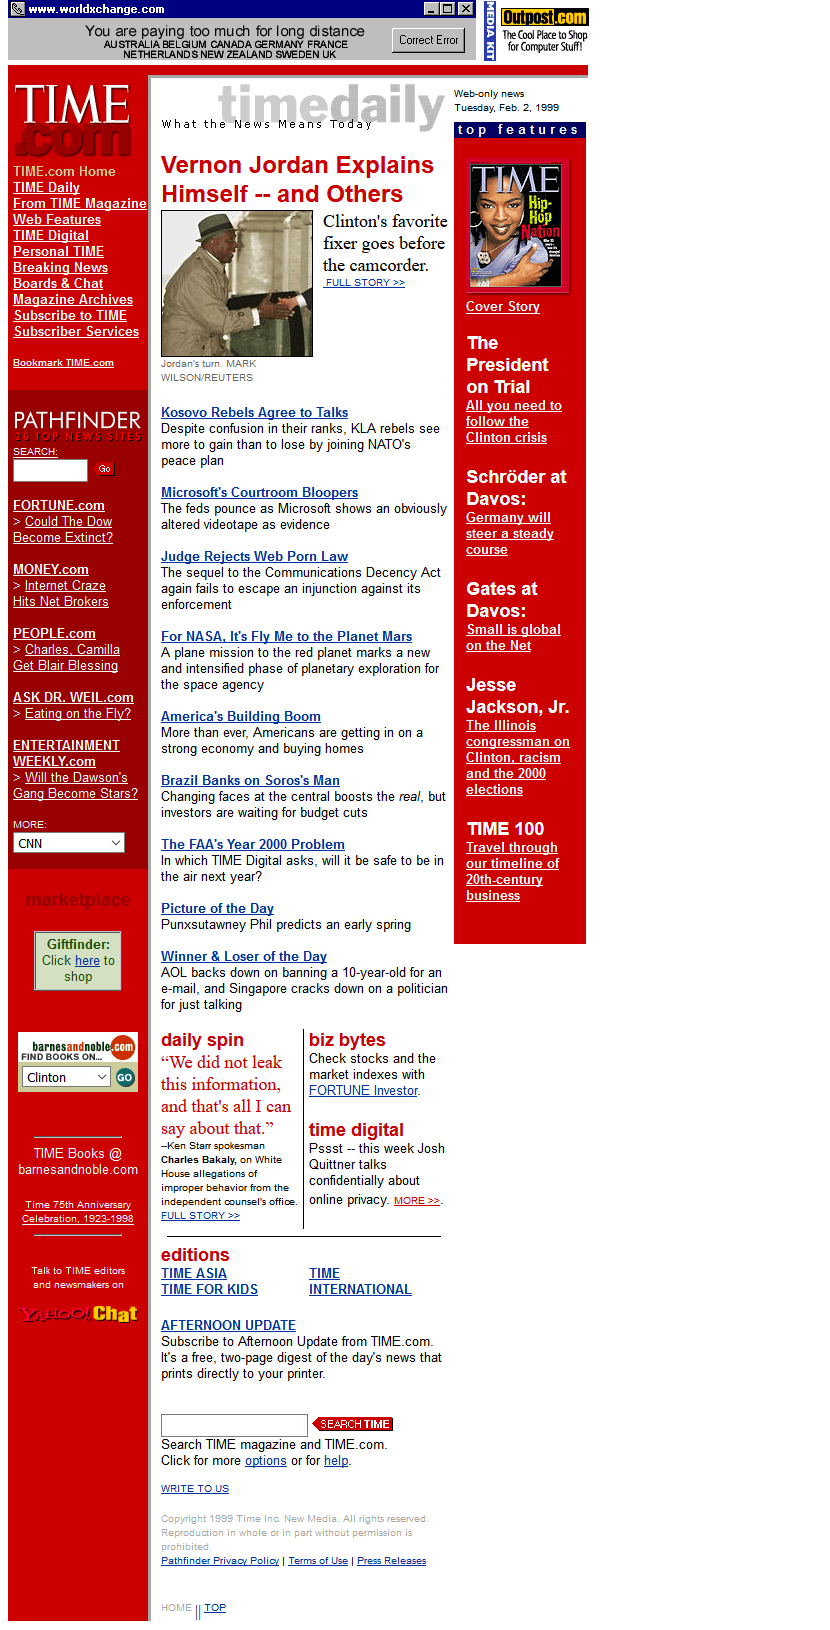 Time in 1999